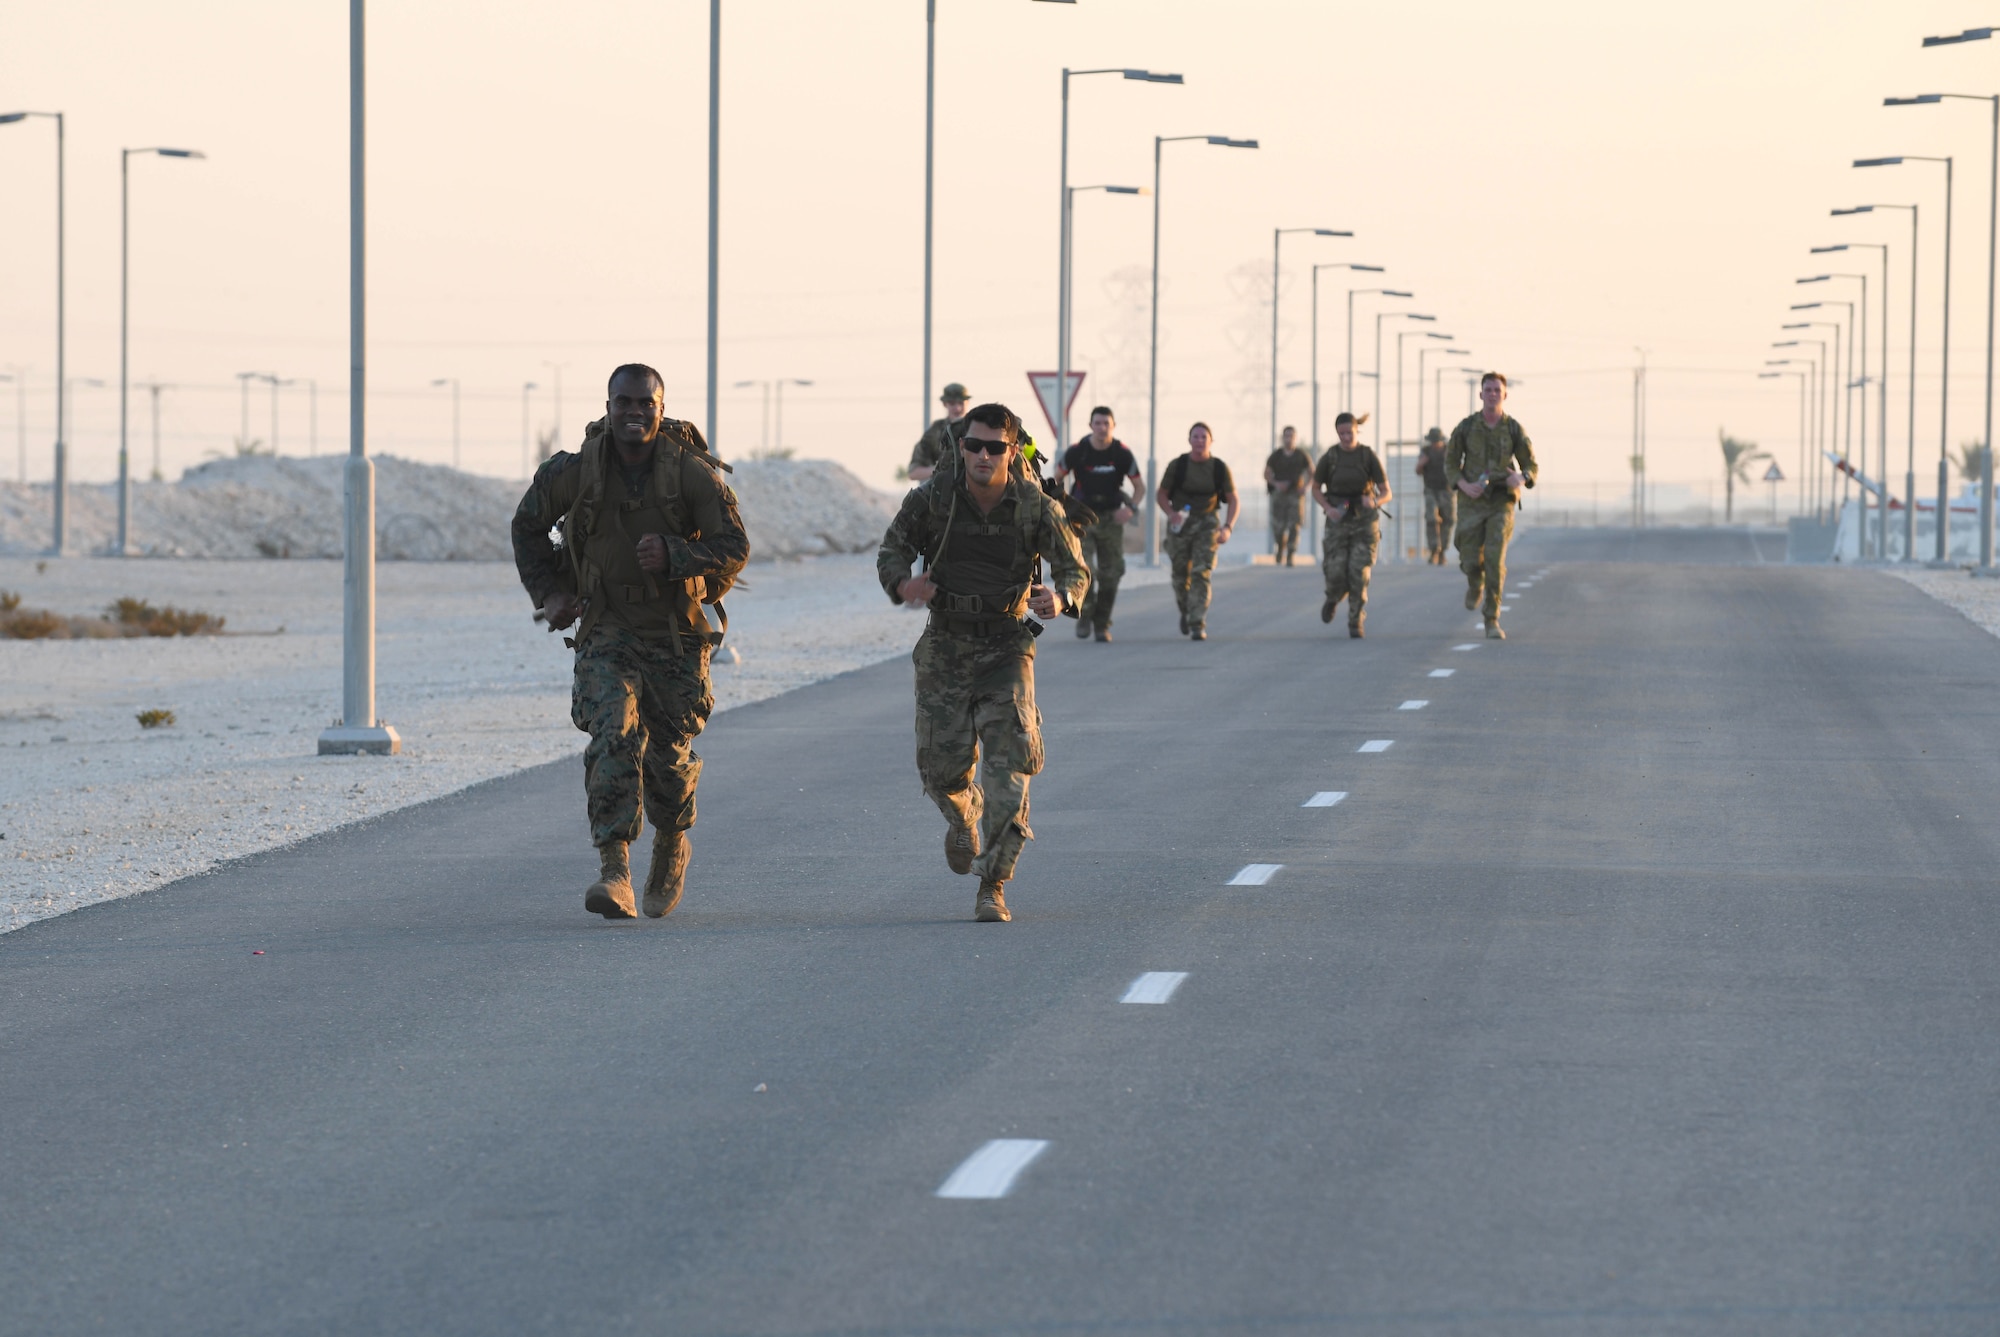 U.S. Marine Corps Chief Warrant Officer Gethro Metellus and U.S. Army 1st Lt. Keven Cordero, deployed to Al Udeid Air Base, Qatar, as part of U.S. Forces Afghanistan, run together while participating in the traditional 30-kilometer (18.6-mile) Norwegian foot march event. The tradition began in 1915, 10 years after Norway gained its independence from Sweden and has become a rite of passage for all Norwegian military members. They joined nearly 120 other coalition members, including Americans, Australians, New Zealanders, British and Canadians who participated in the march under the supervision of Norwegian armed forces Capt. Magne Rambo, deployed to Al Udeid AB as part of the U.S. Central Command Partner Integration Enterprise. (U.S. Air Force photo by Staff Sgt. Kayla White)